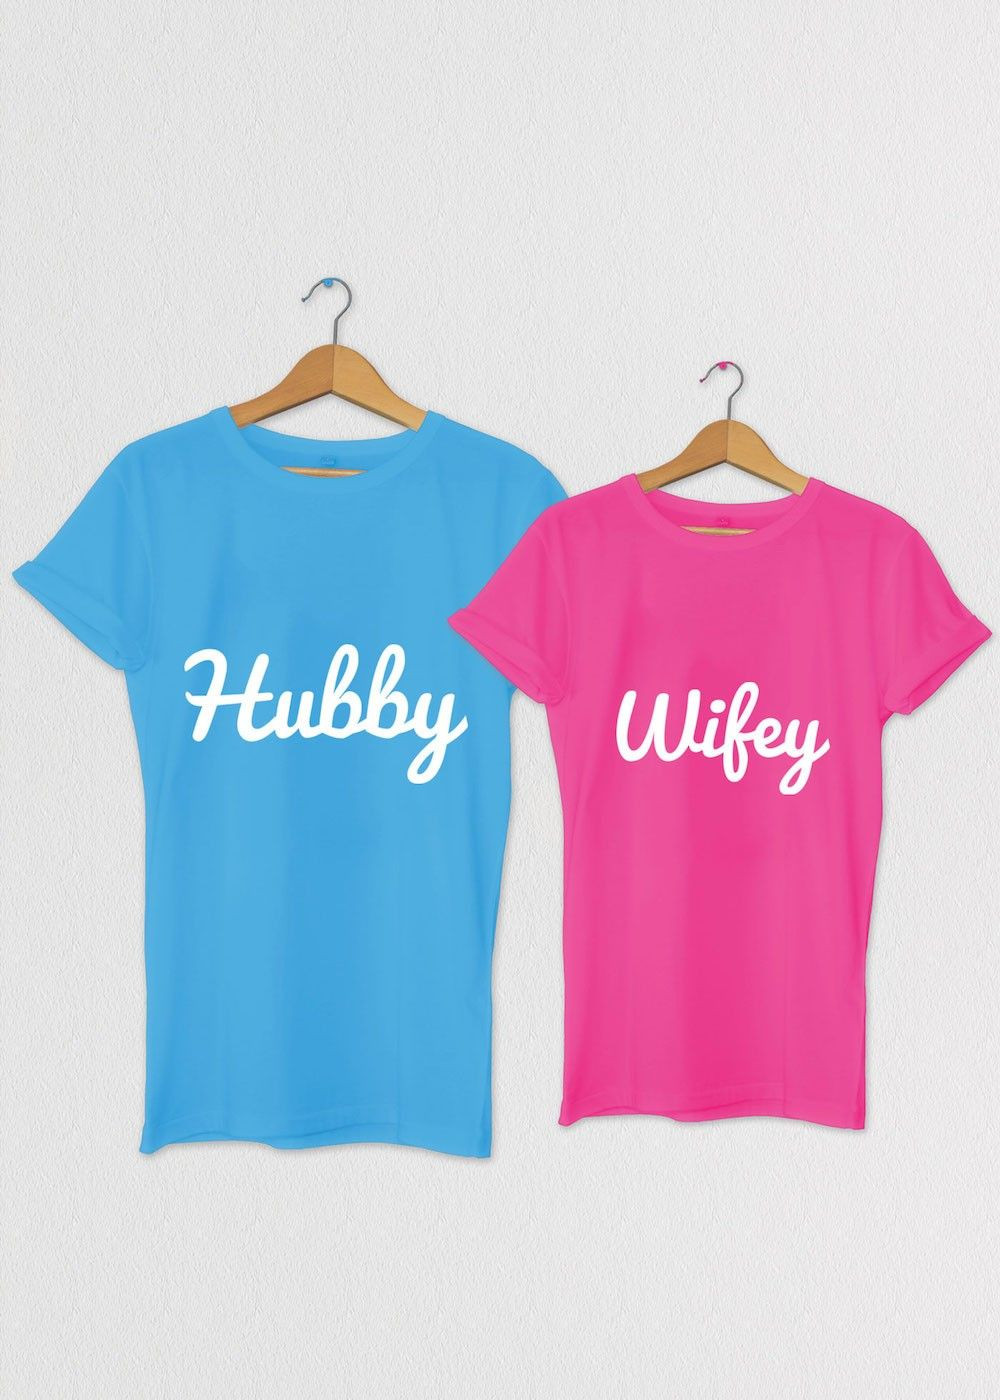 Gift Ideas For Newly Married Couple Indian
 Couple T Shirts Hubby and Wifey Tee for Newly Married